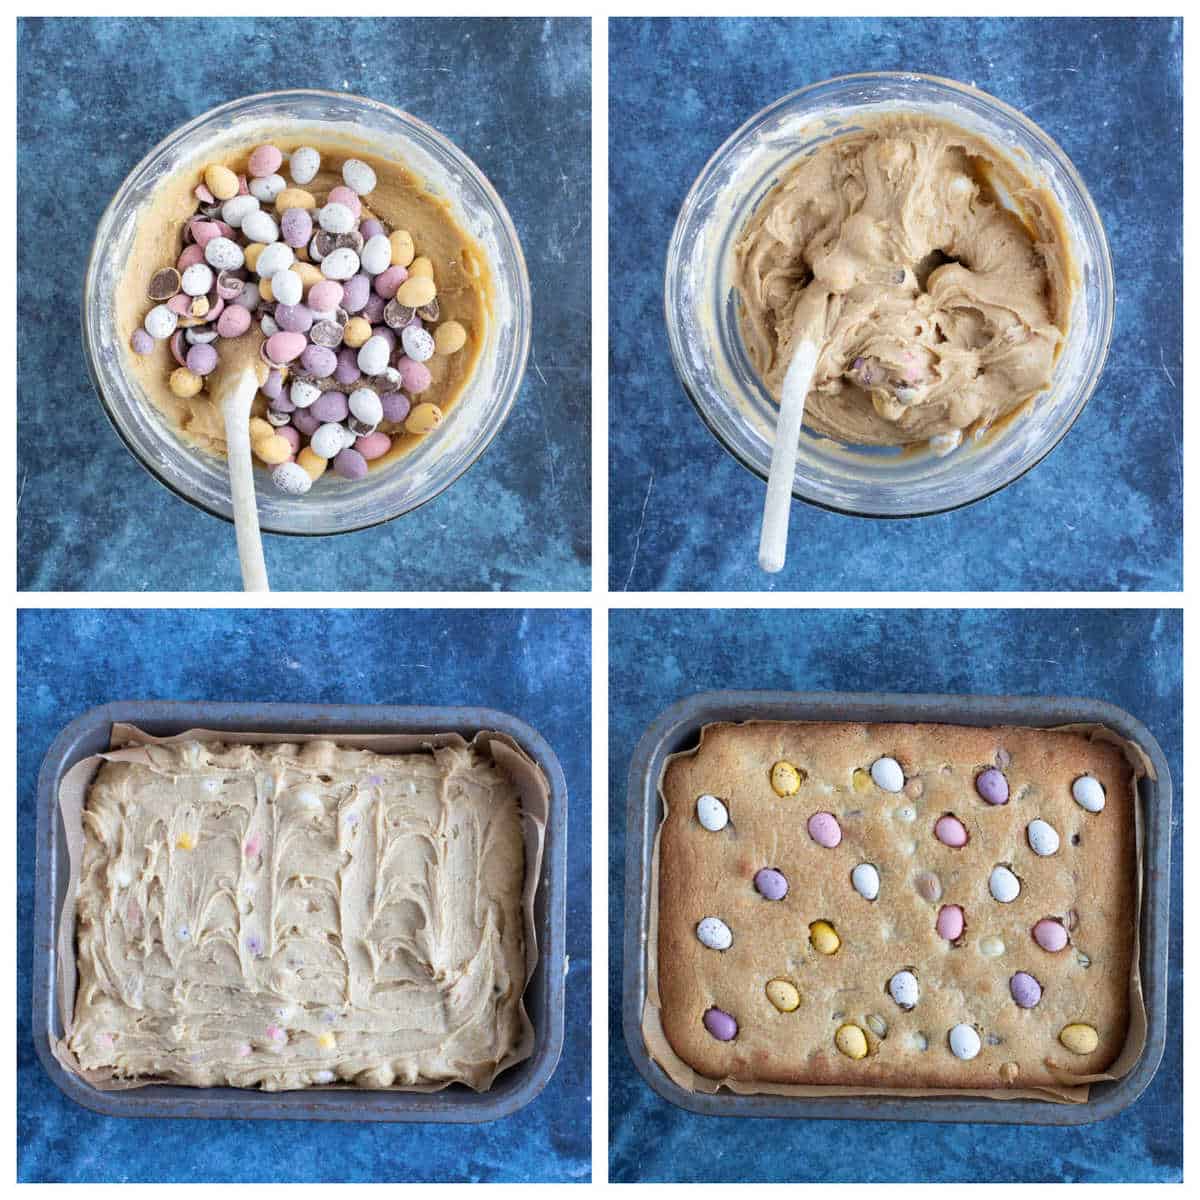 Step by step photo instructions for making mini egg cookie bars part 2.